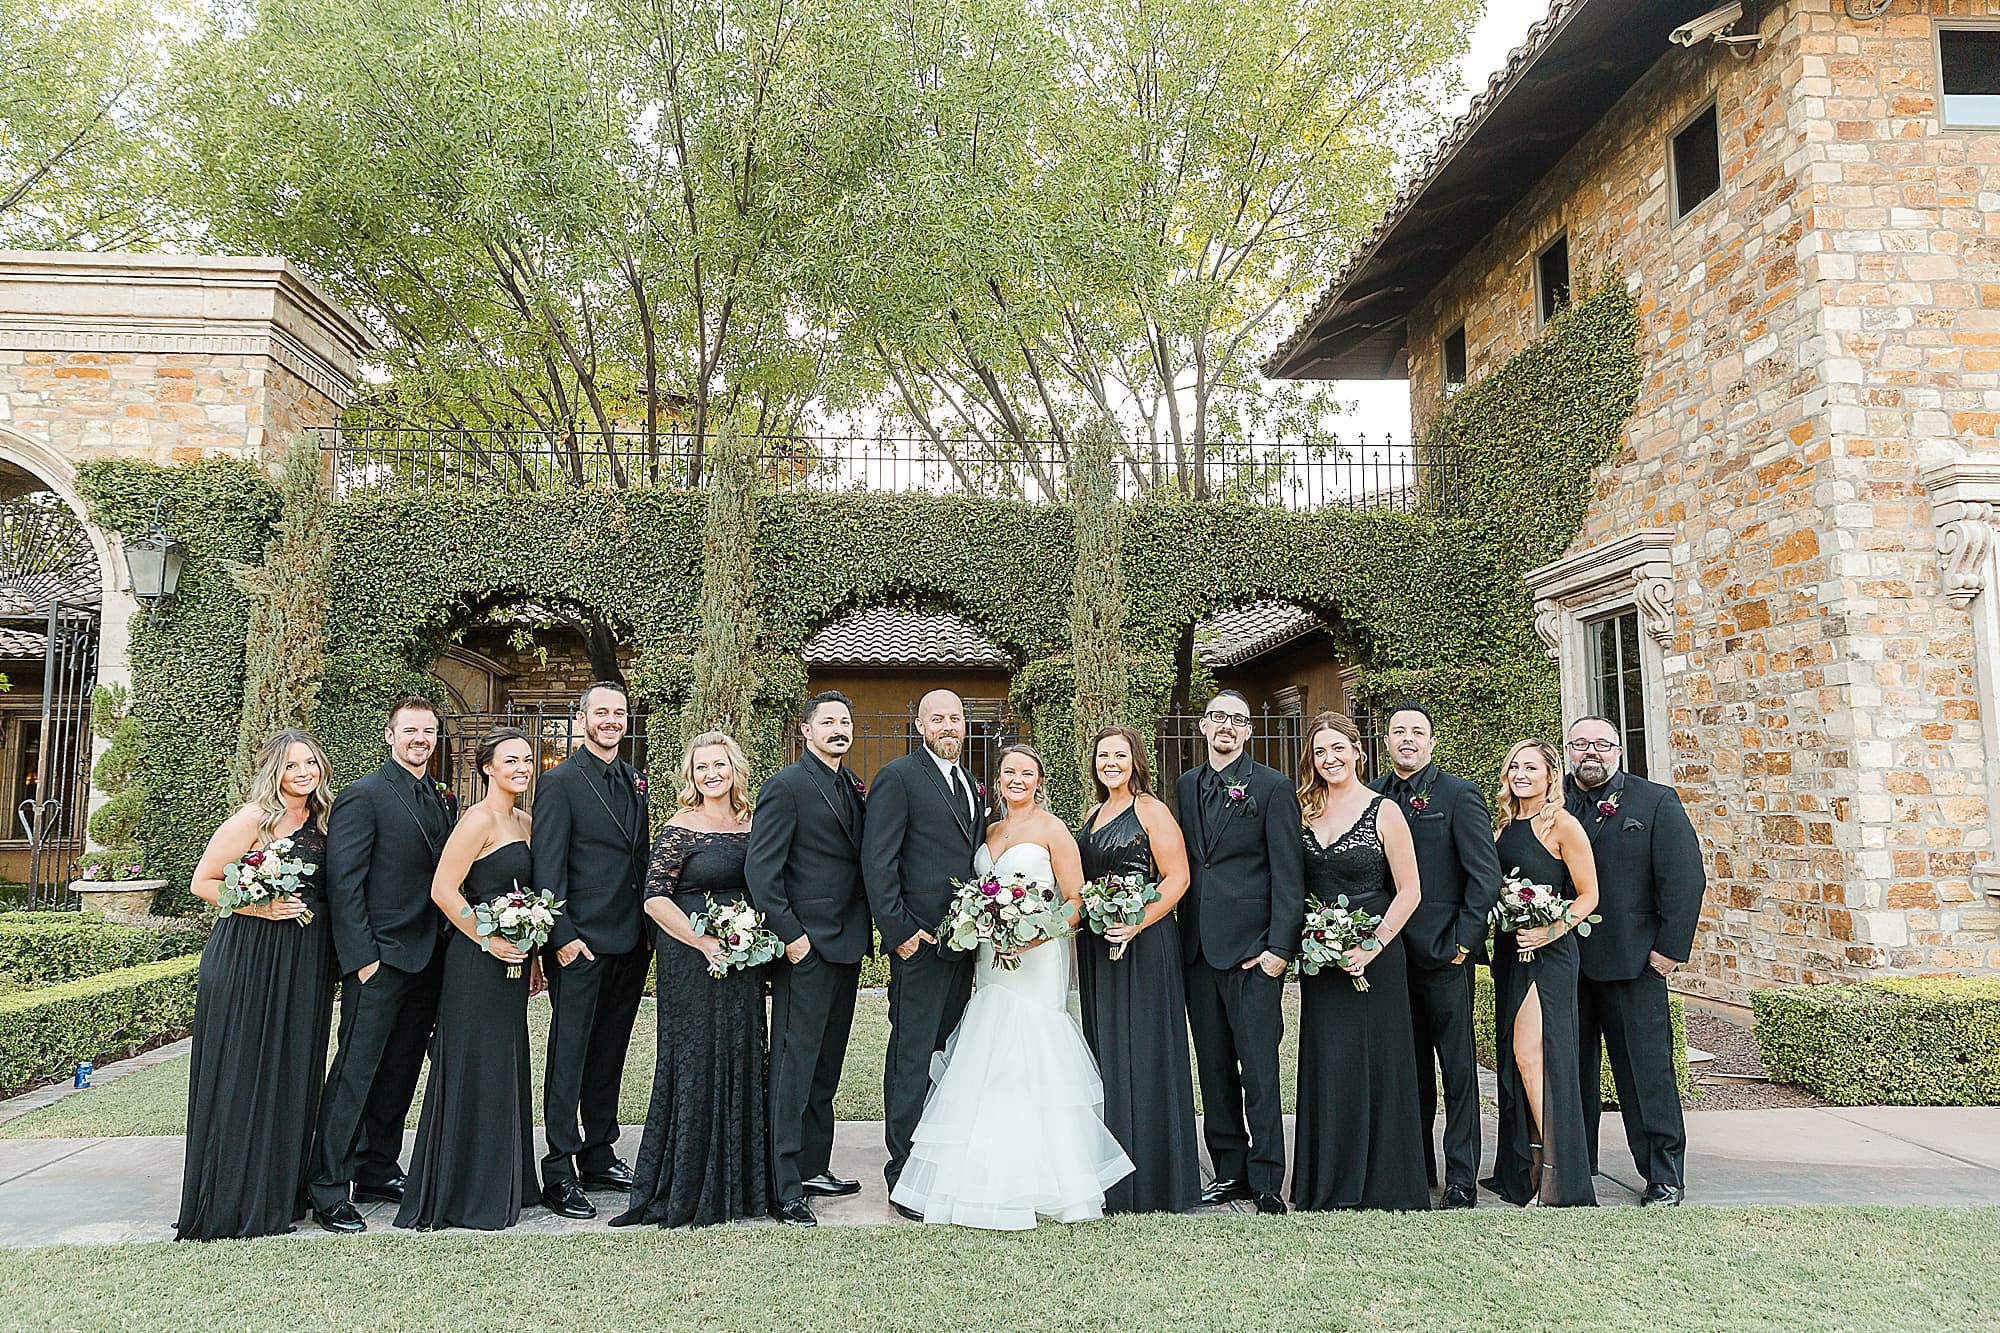 Classic Black and White Wedding Bridal Party